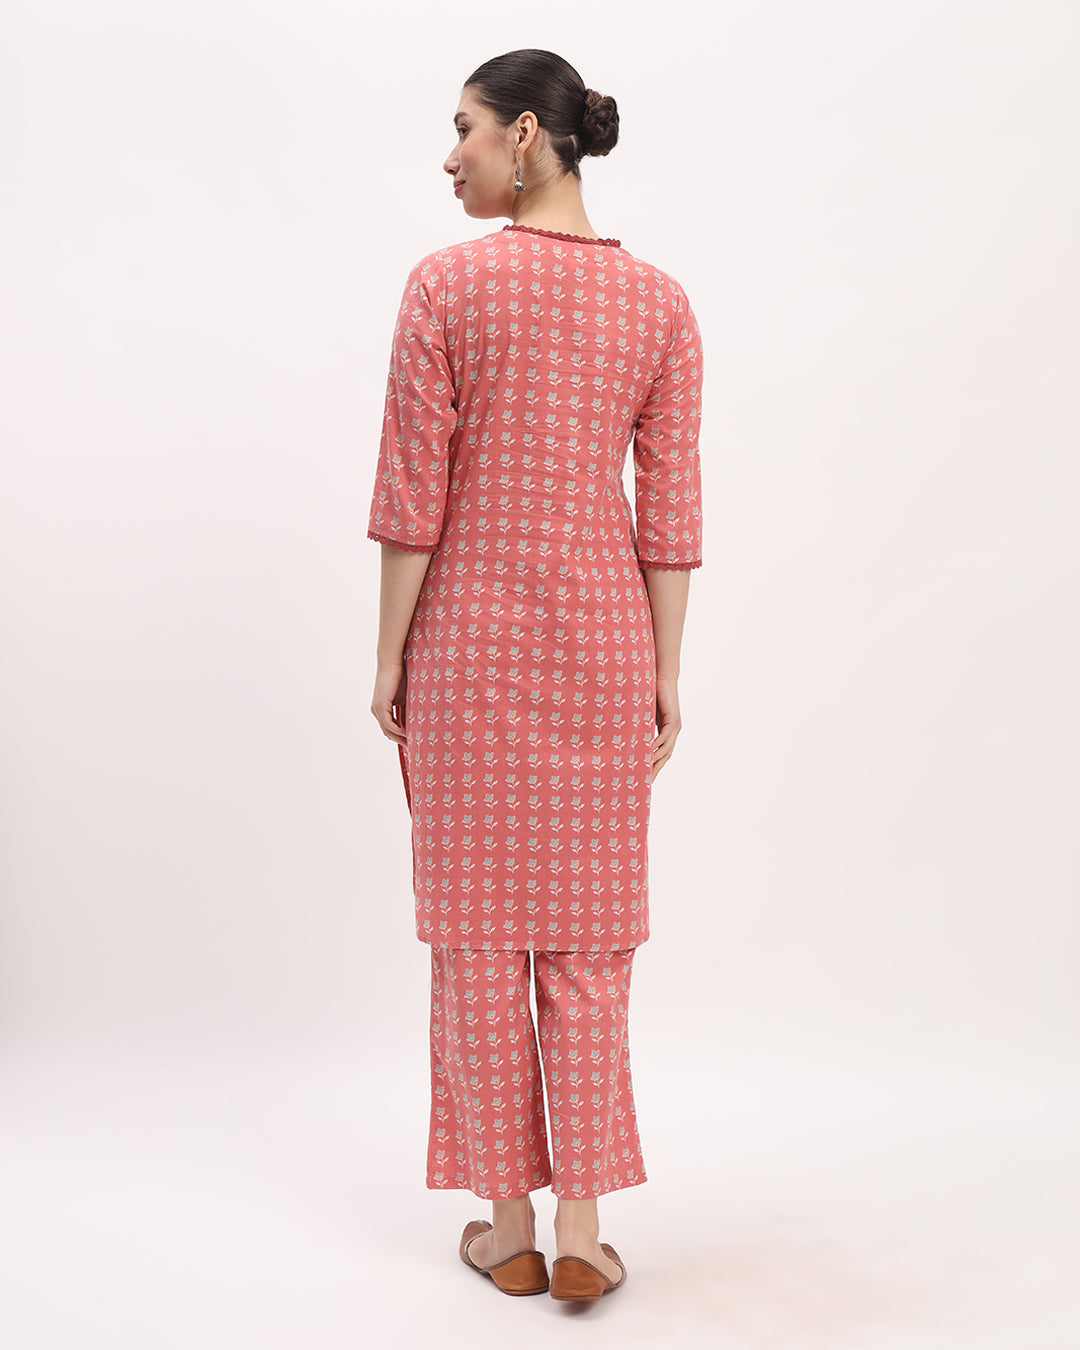 Combo: Fire Lillies & English Floral Garden Lace Affair Printed Kurta (Without Bottoms)